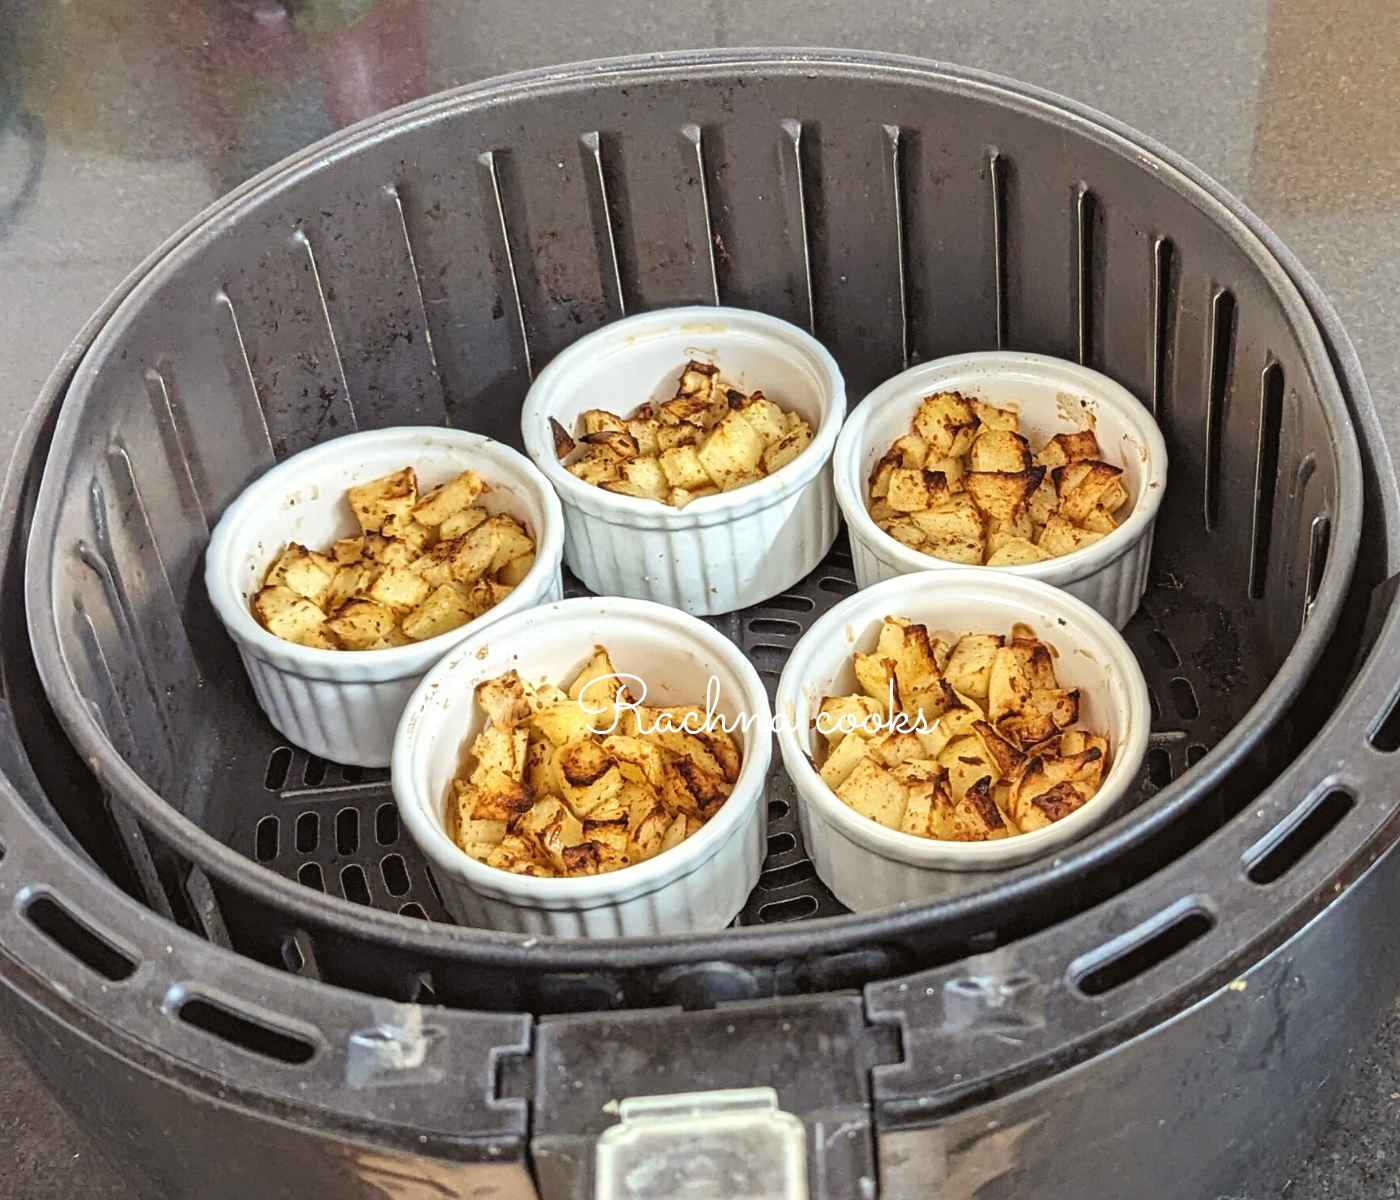 Caramelized and cooked apples in ramekins in air fryer basket